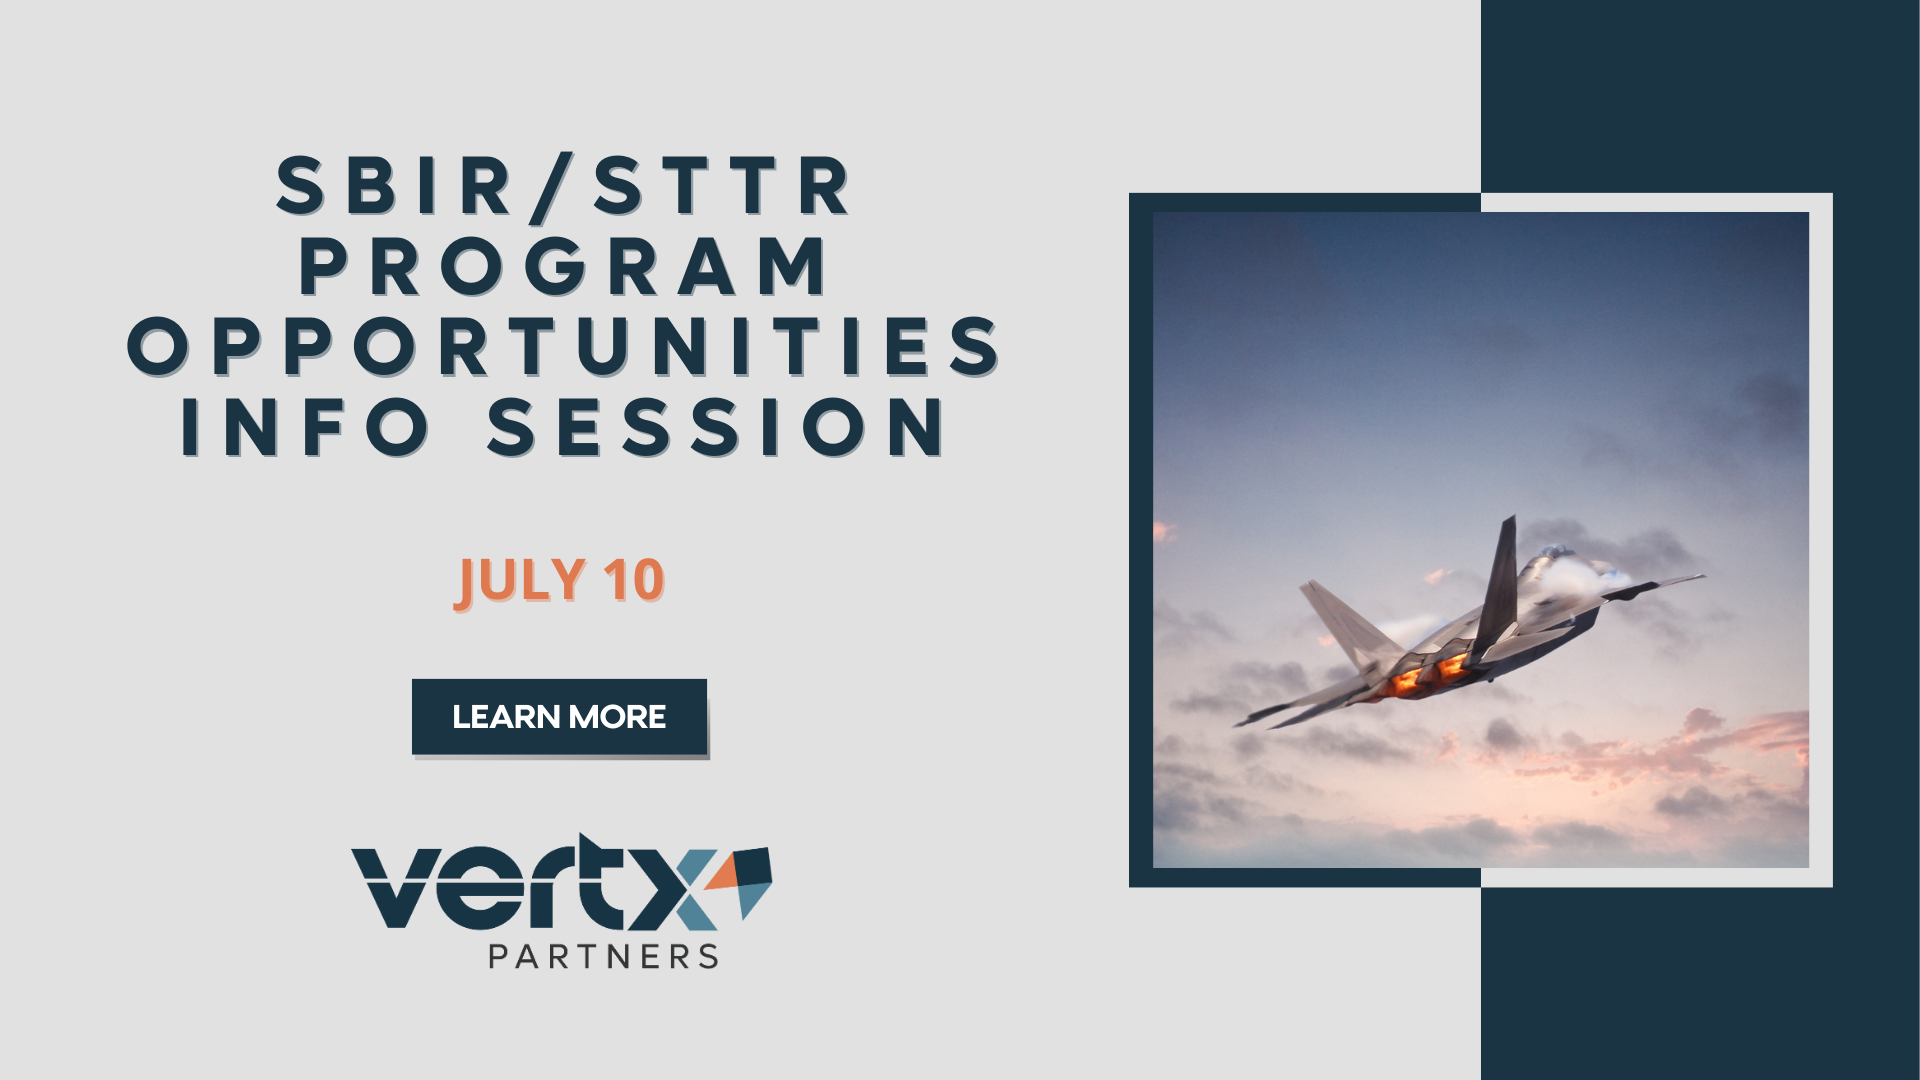 This graphic has the title "SBIR/STTR Program Opportunities Info Session" with the date July 10th under it and a photo of an F22 to the right of it.